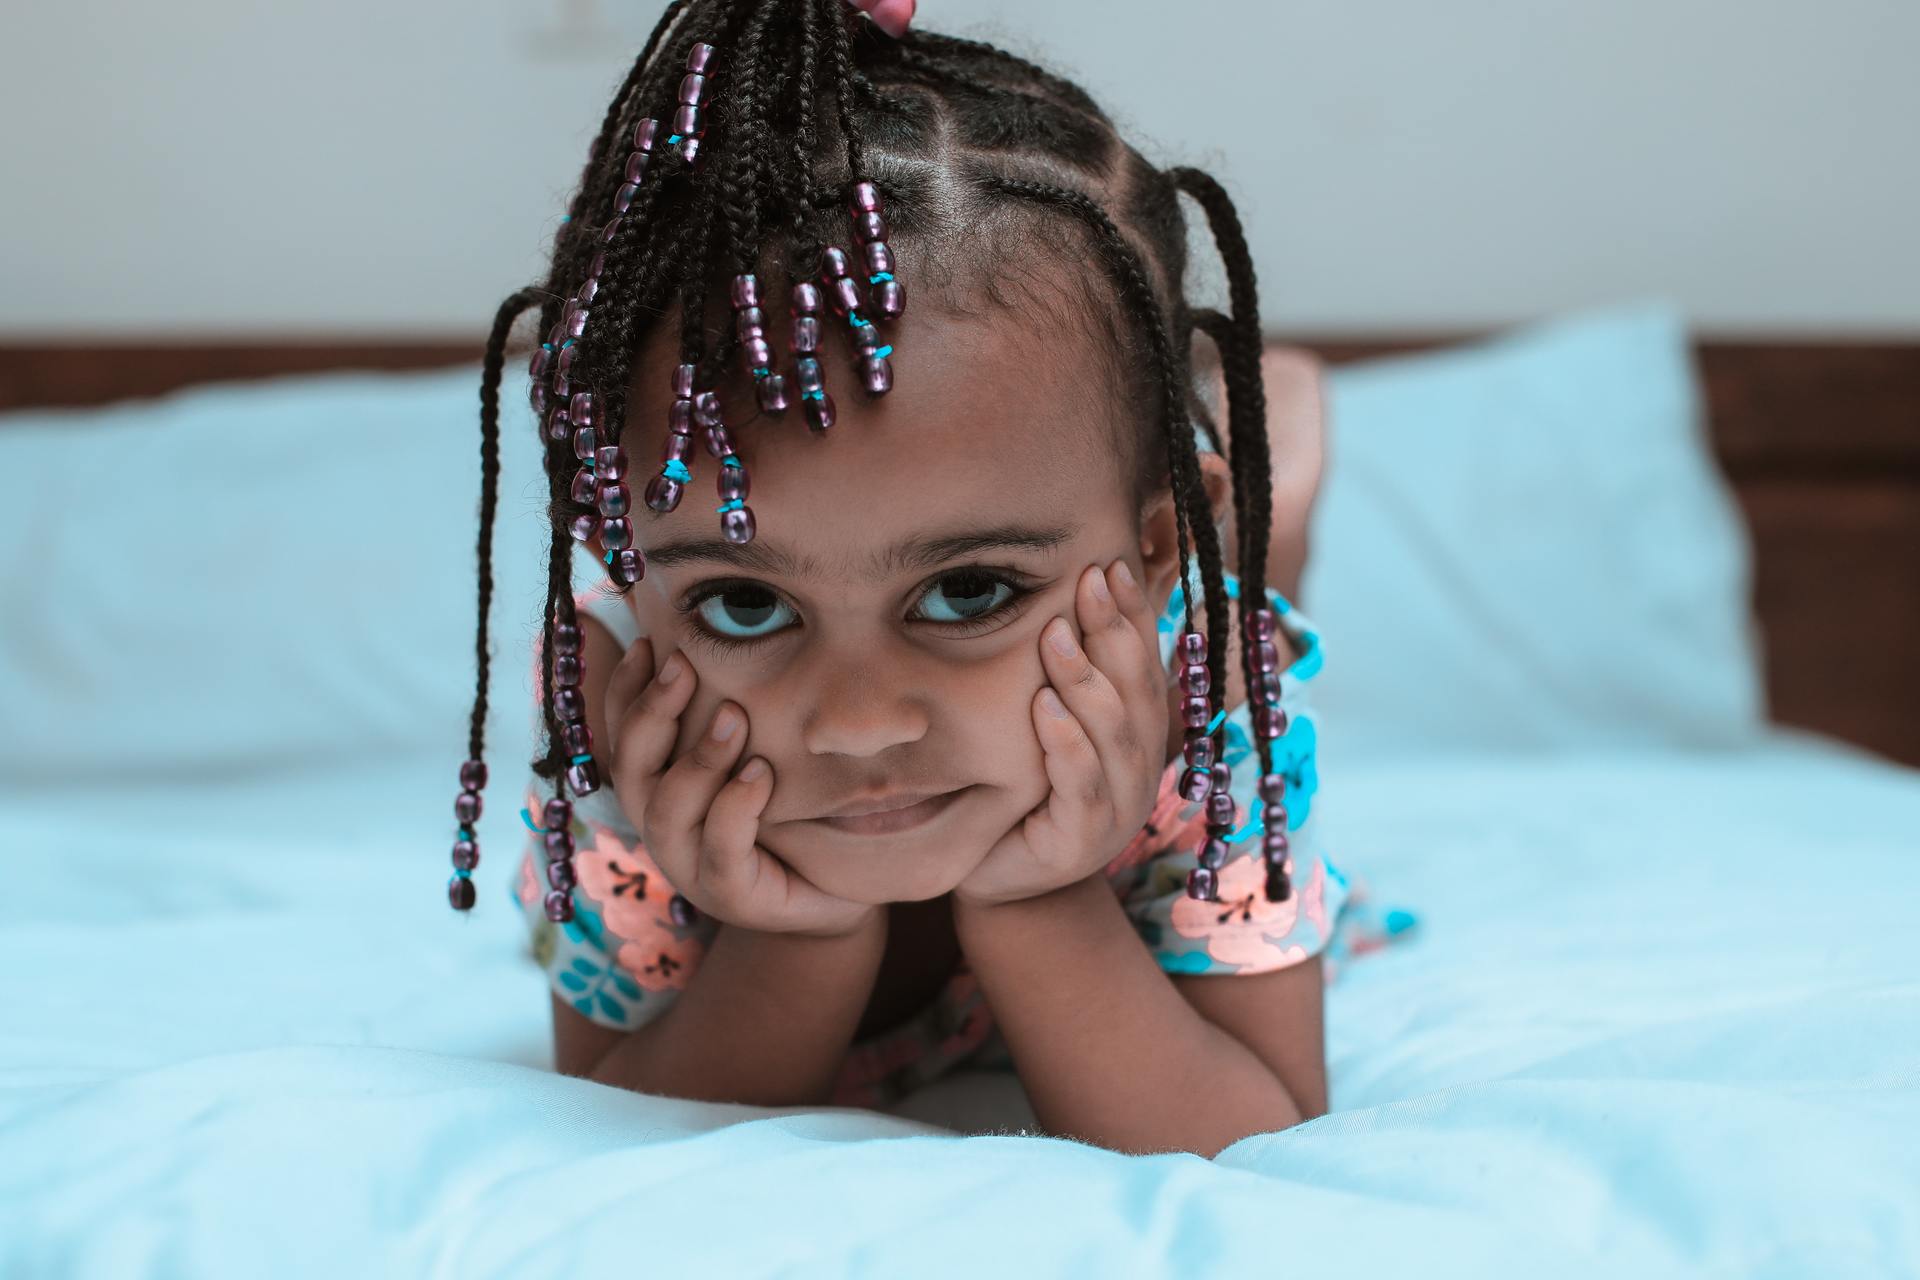 Little girl with braids looking sadly at the camera